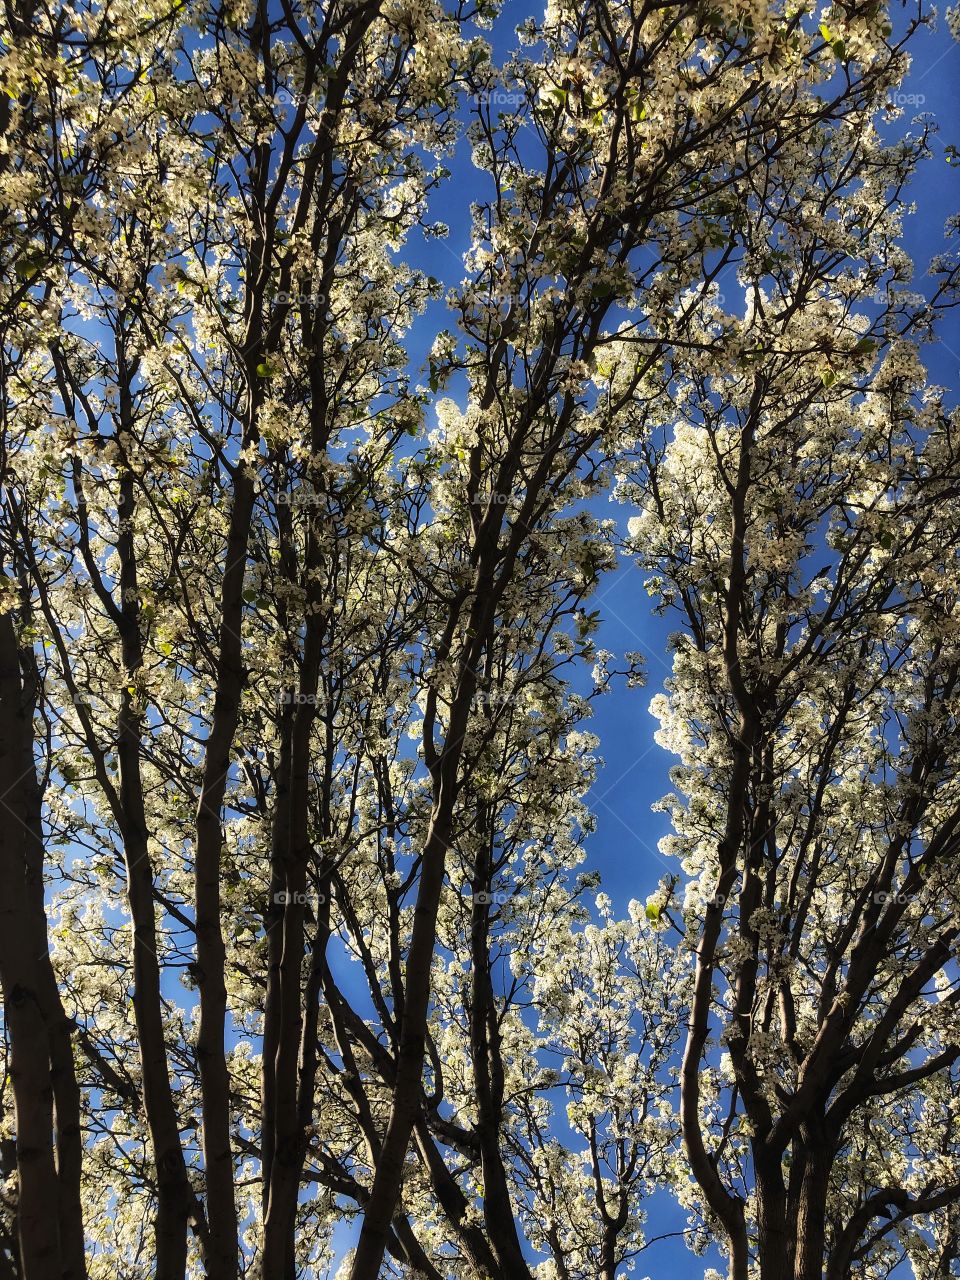 Blue skies and white Flowers. This tree makes me want Easter eggs and wear pastels! I love spring.